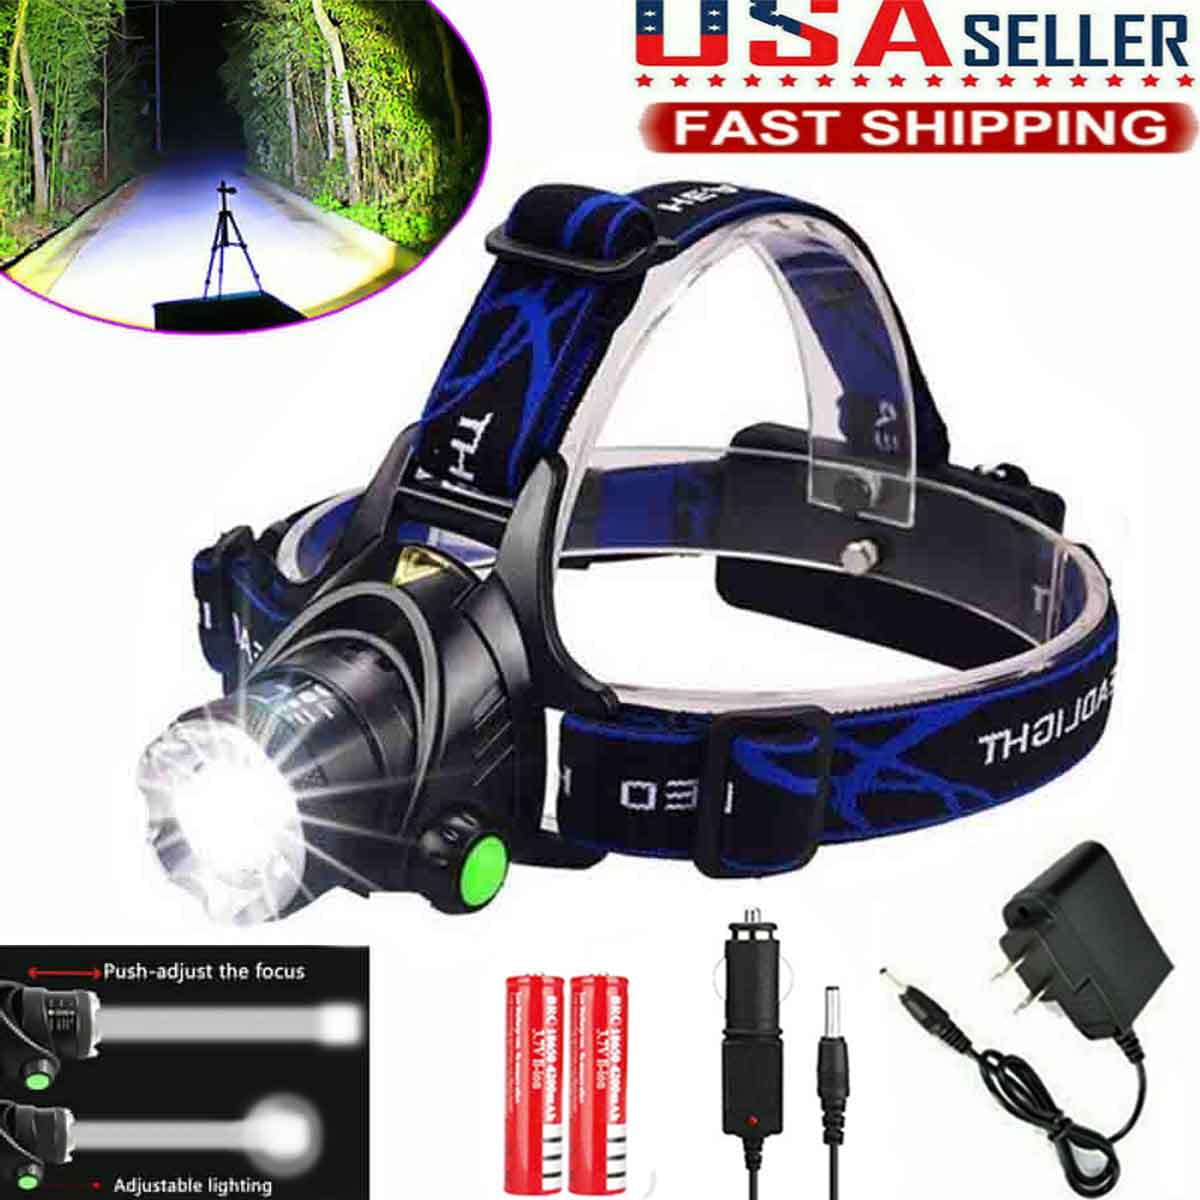 990000LM LED Headlamp USB Rechargeable Head Light 3 Modes Zoomable Super bright 